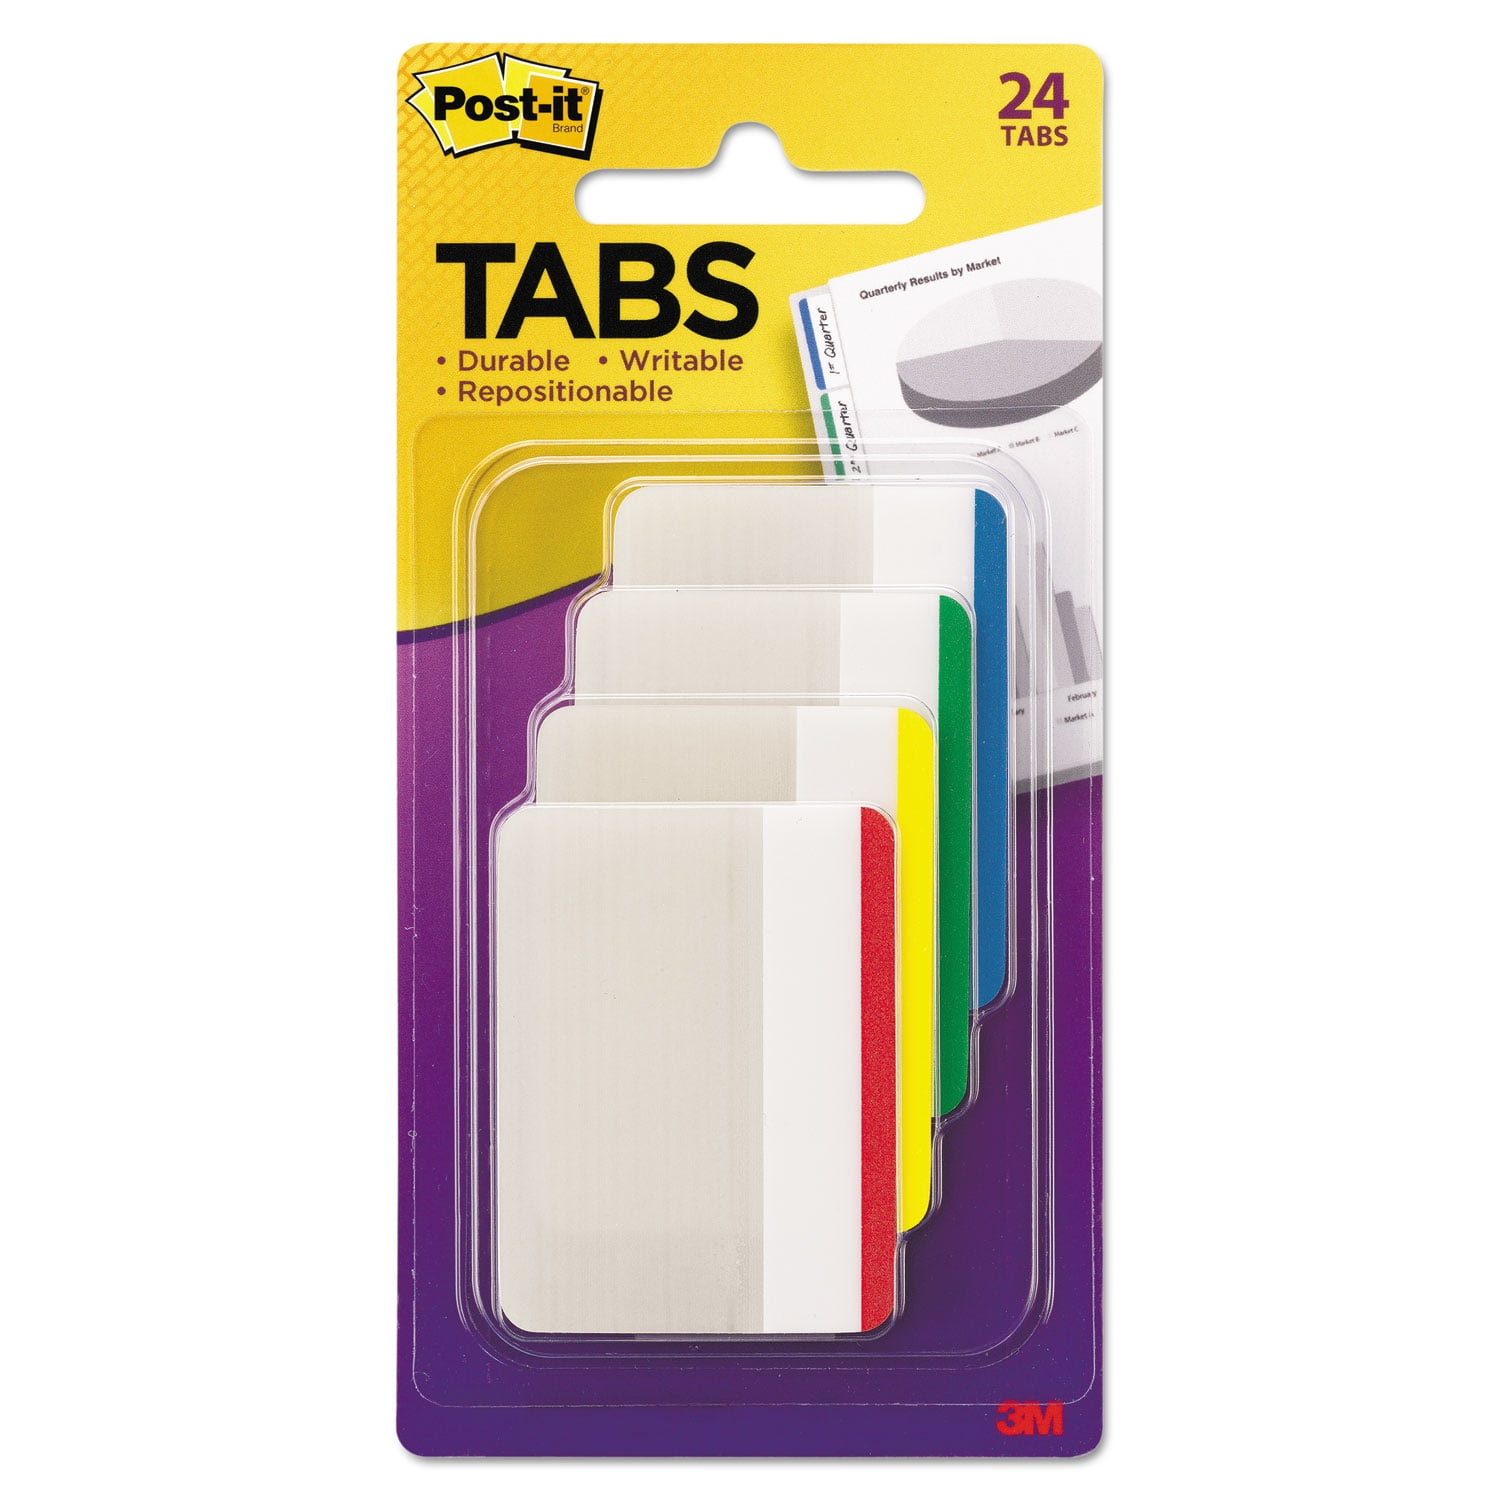 3M Post-it Solid Color Self-Stick Tabs, Write-On, 1 x 1.5 - 88 pack